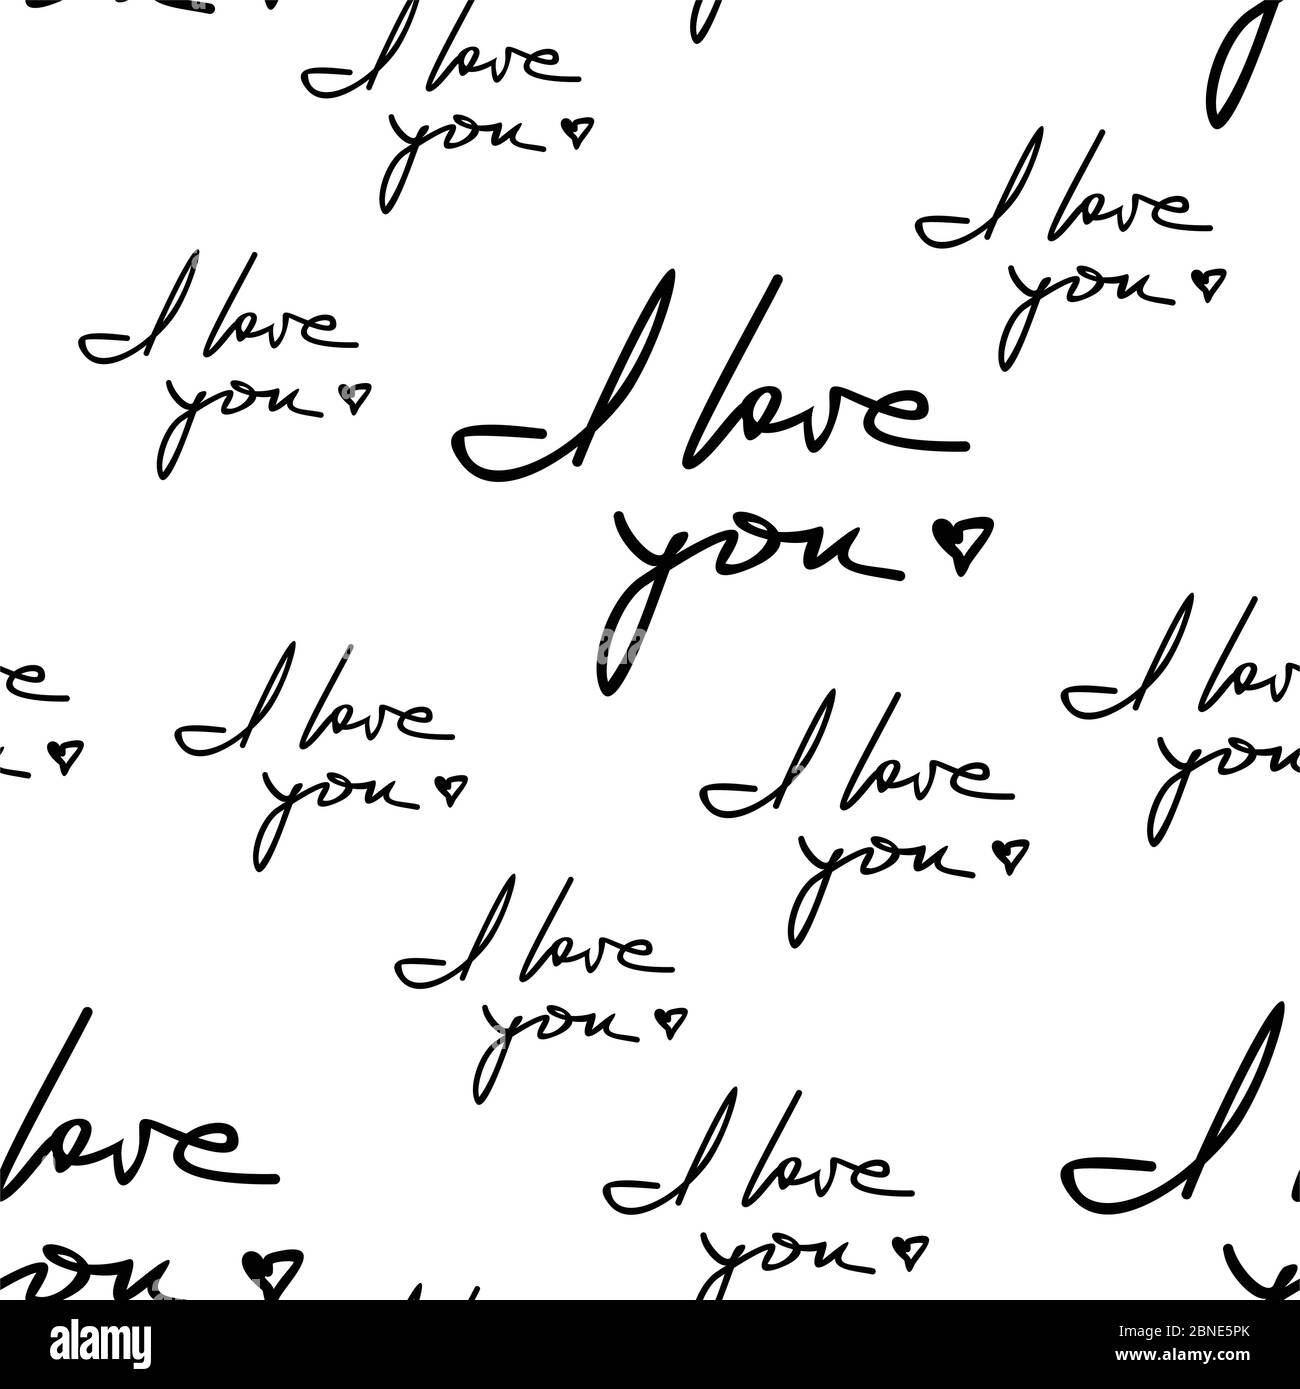 I love you hand written phrase seamless pattern. Romantic quotes randomly placed on white background. Wrapping texture suitable for Valentine day gree Stock Vector